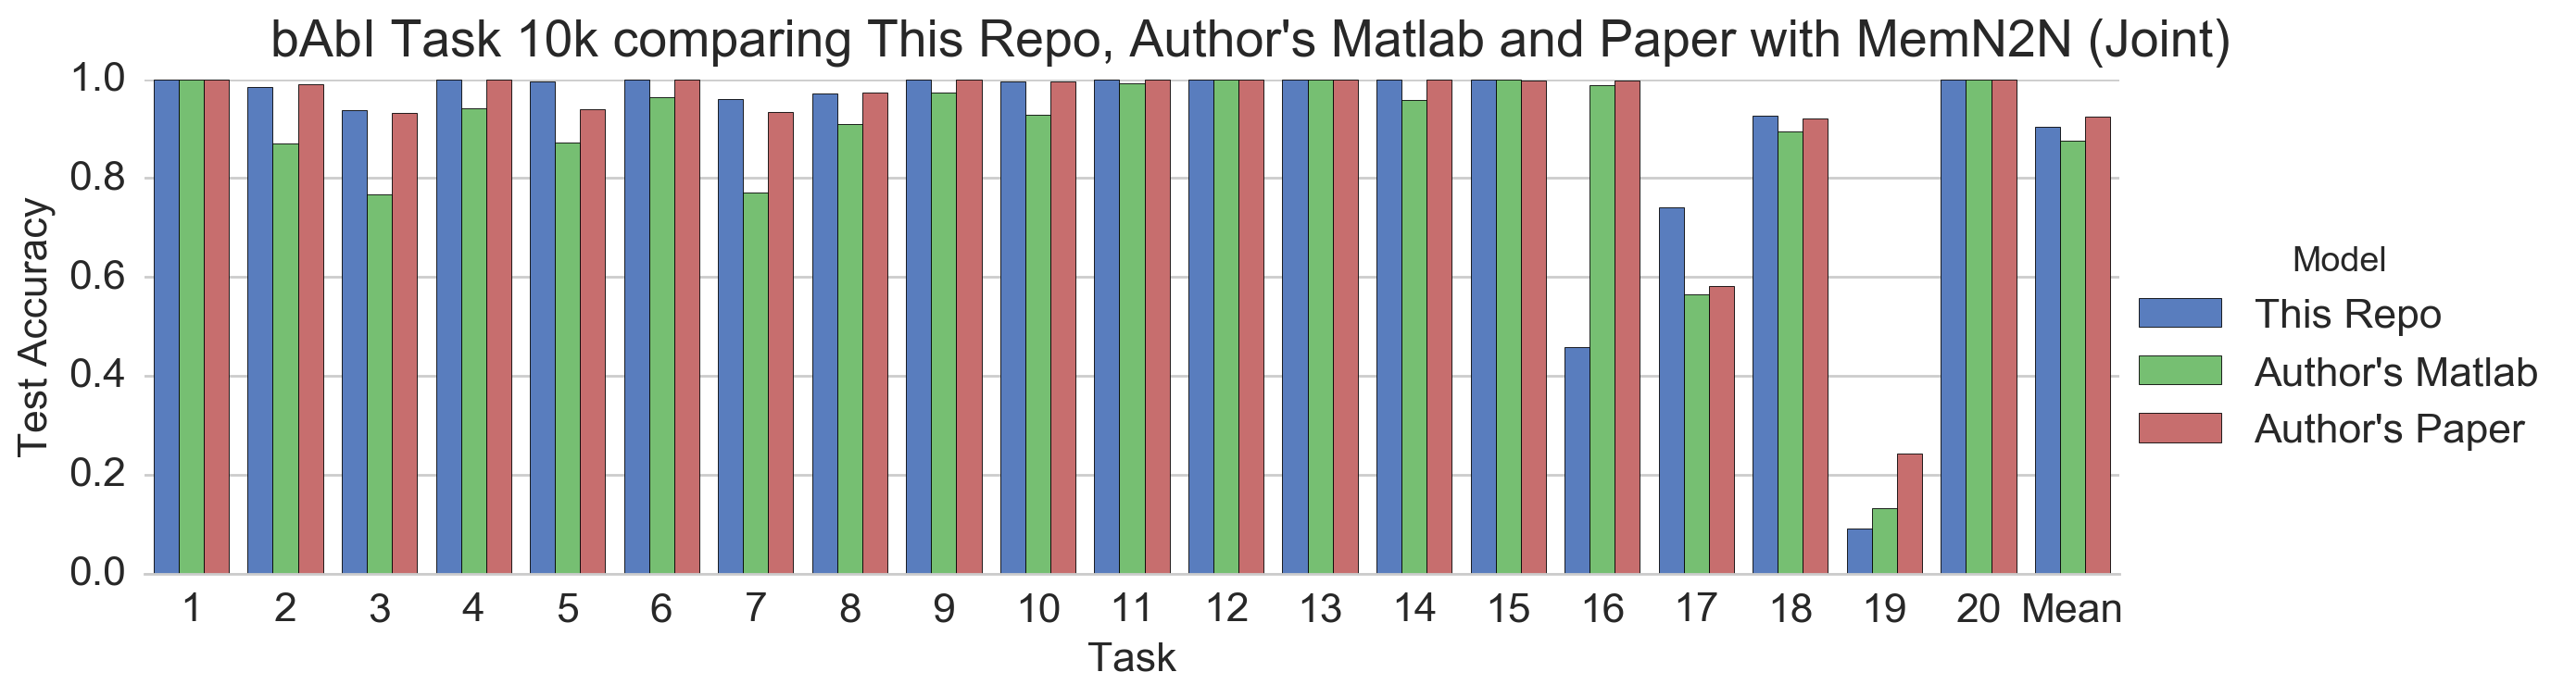 bAbI Task 10k comparing This Repo, Author's Matlab and Paper with MemN2N (Joint)